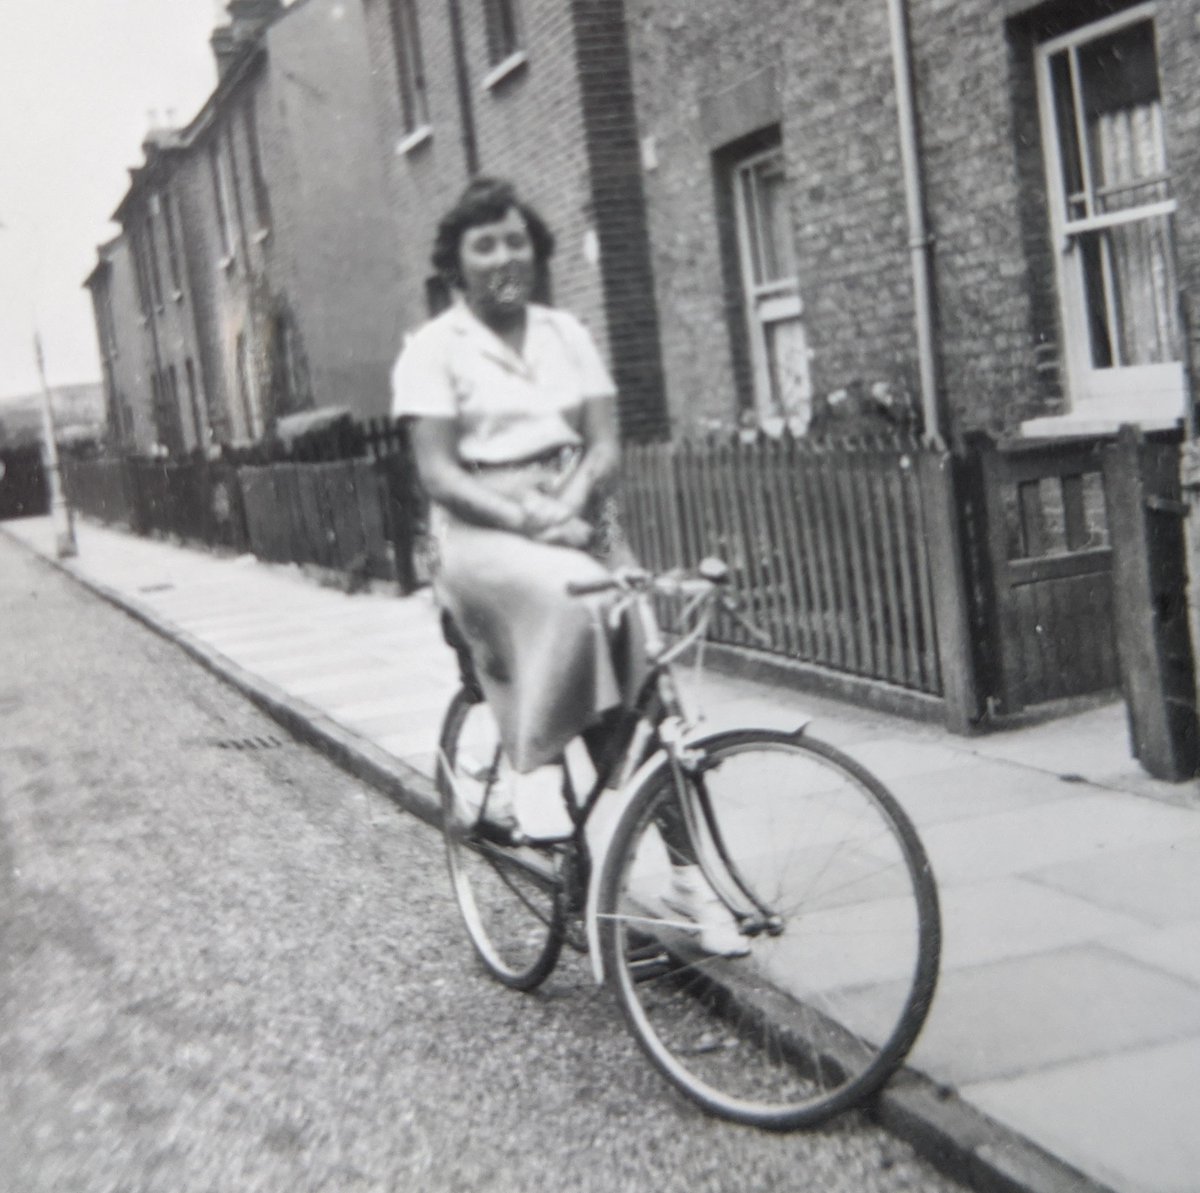 This is my mum, Rose Mortleman, as a teenager in about 1945 outside the 2-up, 2-down terraced house in Twickenham where she grew up with her mum, dad, elderly gran and several pets. It looks like a bubblegum bubble has burst on her face, but it's just foxing on the old photo.